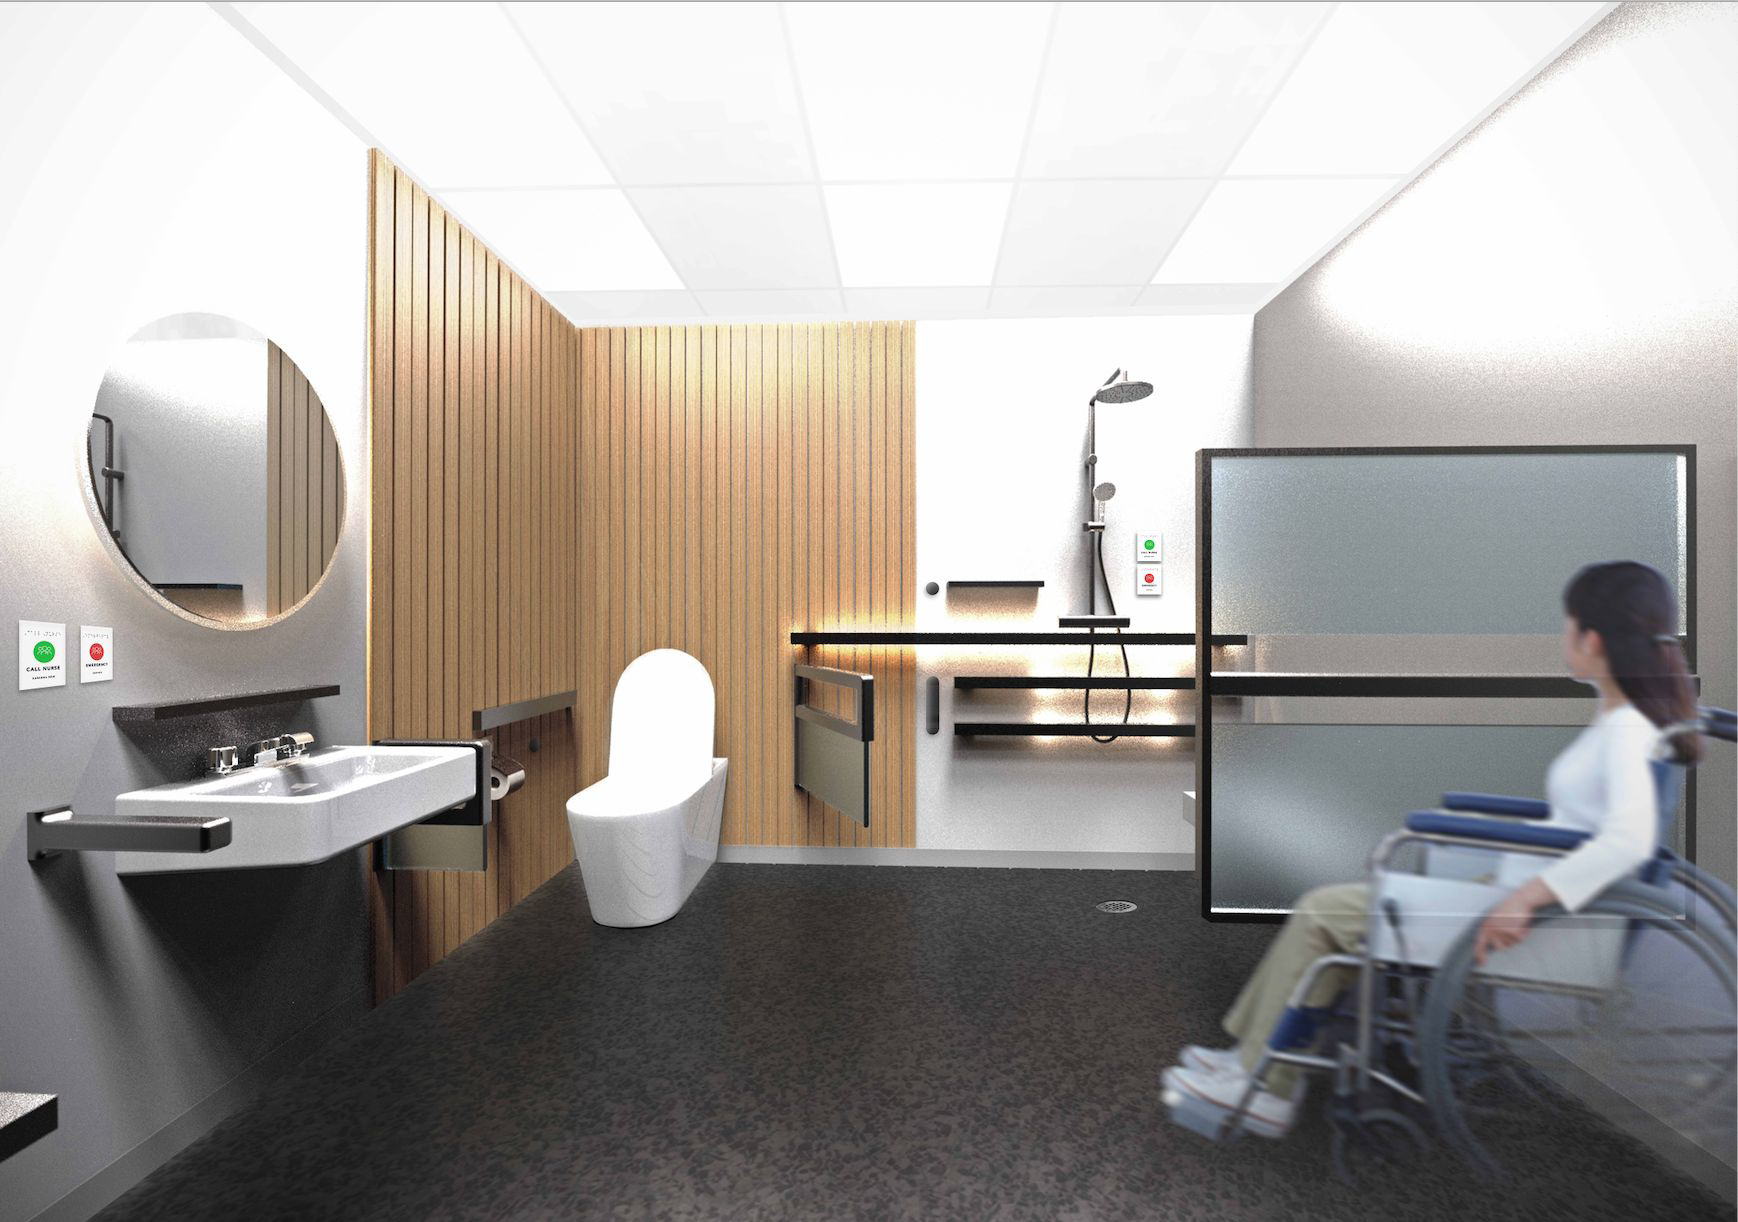 Elective surgery ward bathroom by Rebecca McLean and Sam How